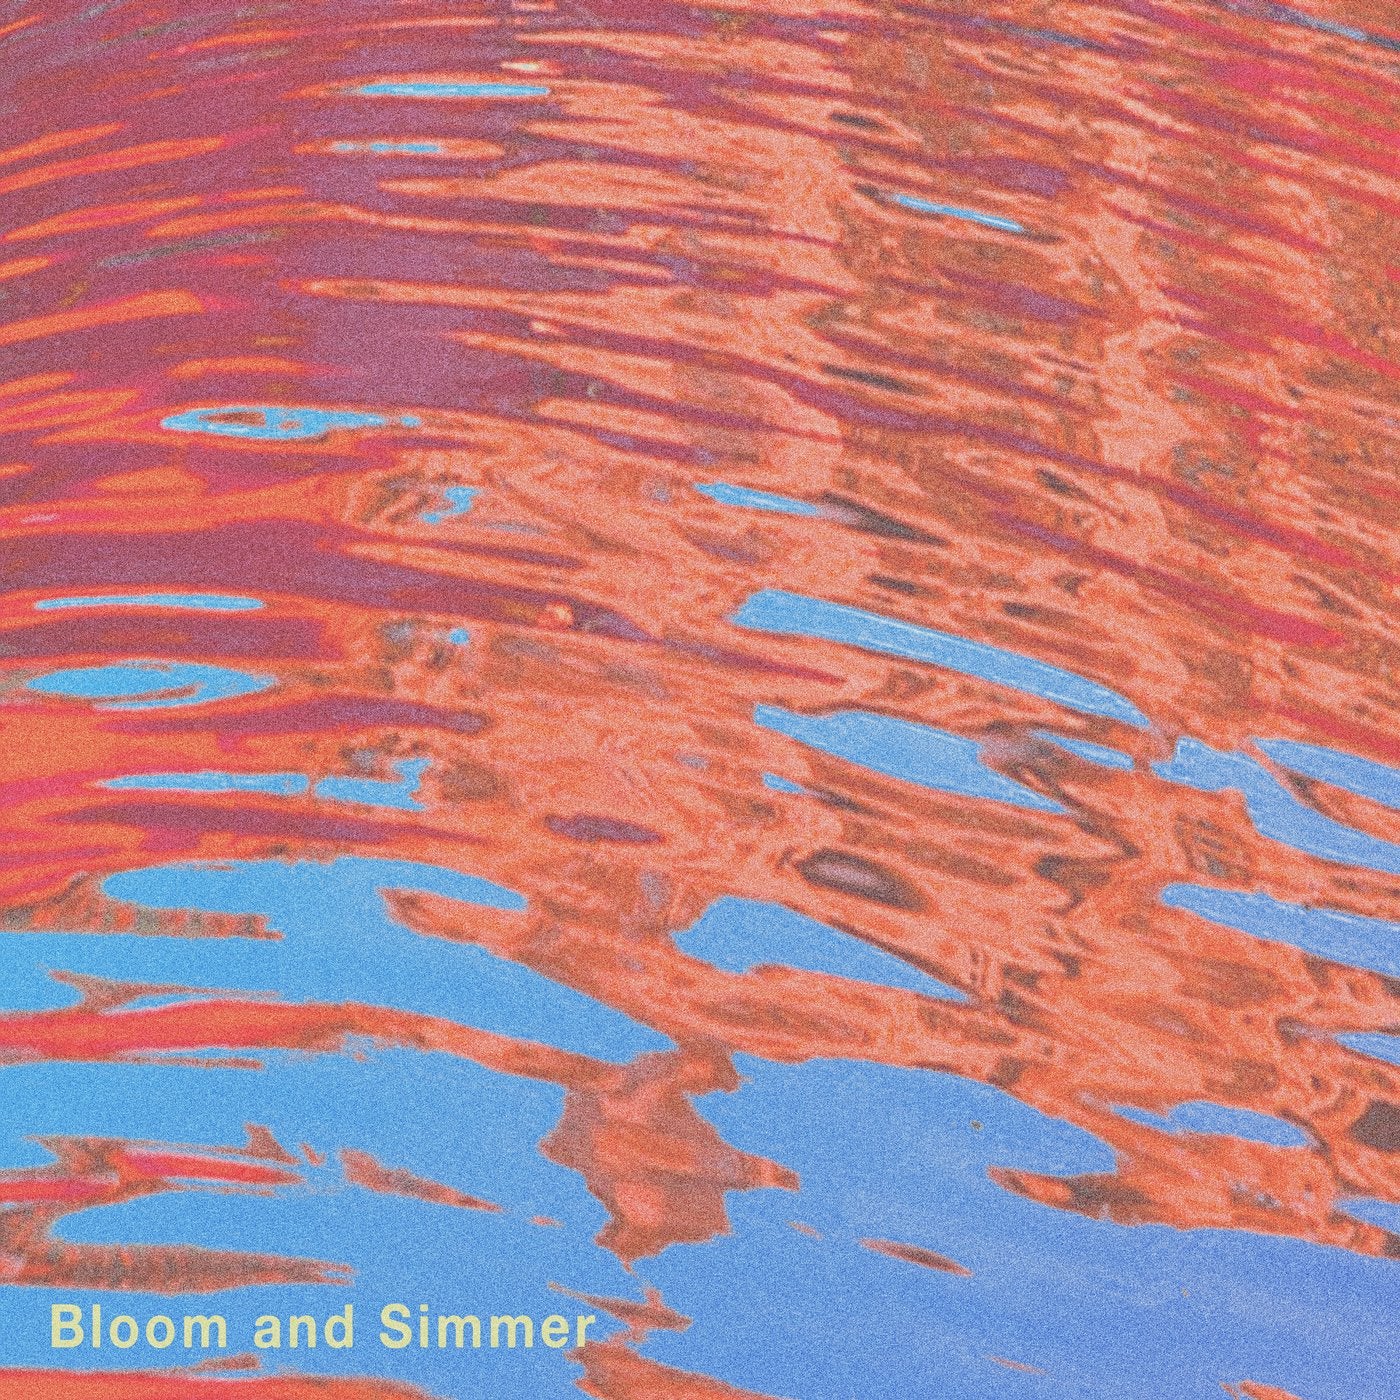 Bloom and Simmer